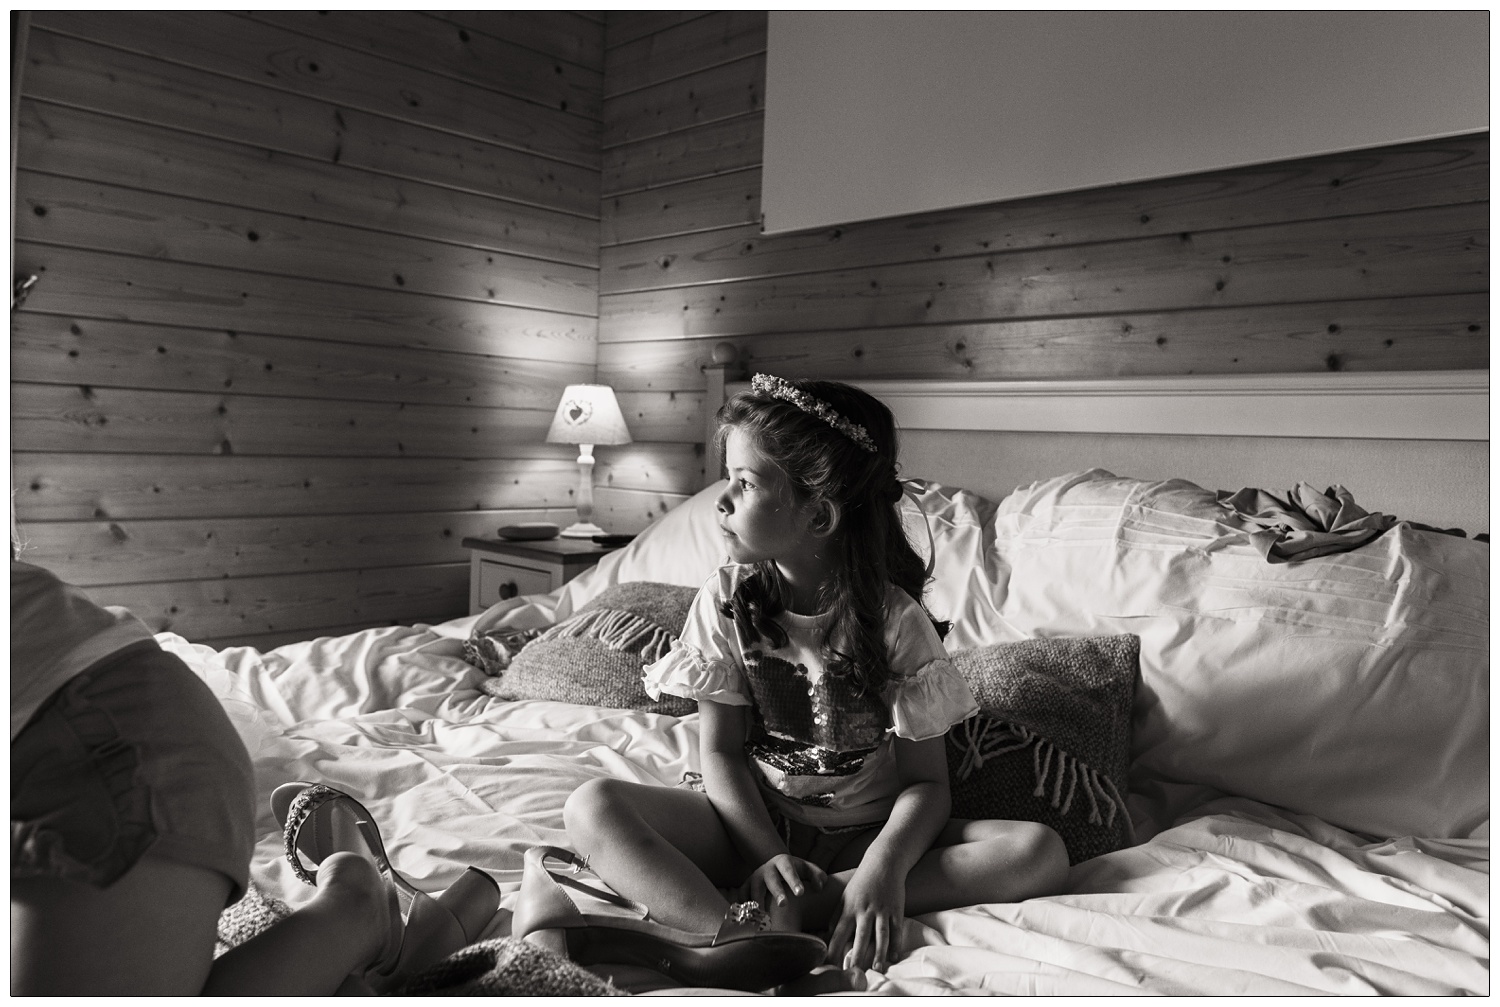 A young girl sits on a bed on the morning of a wedding.